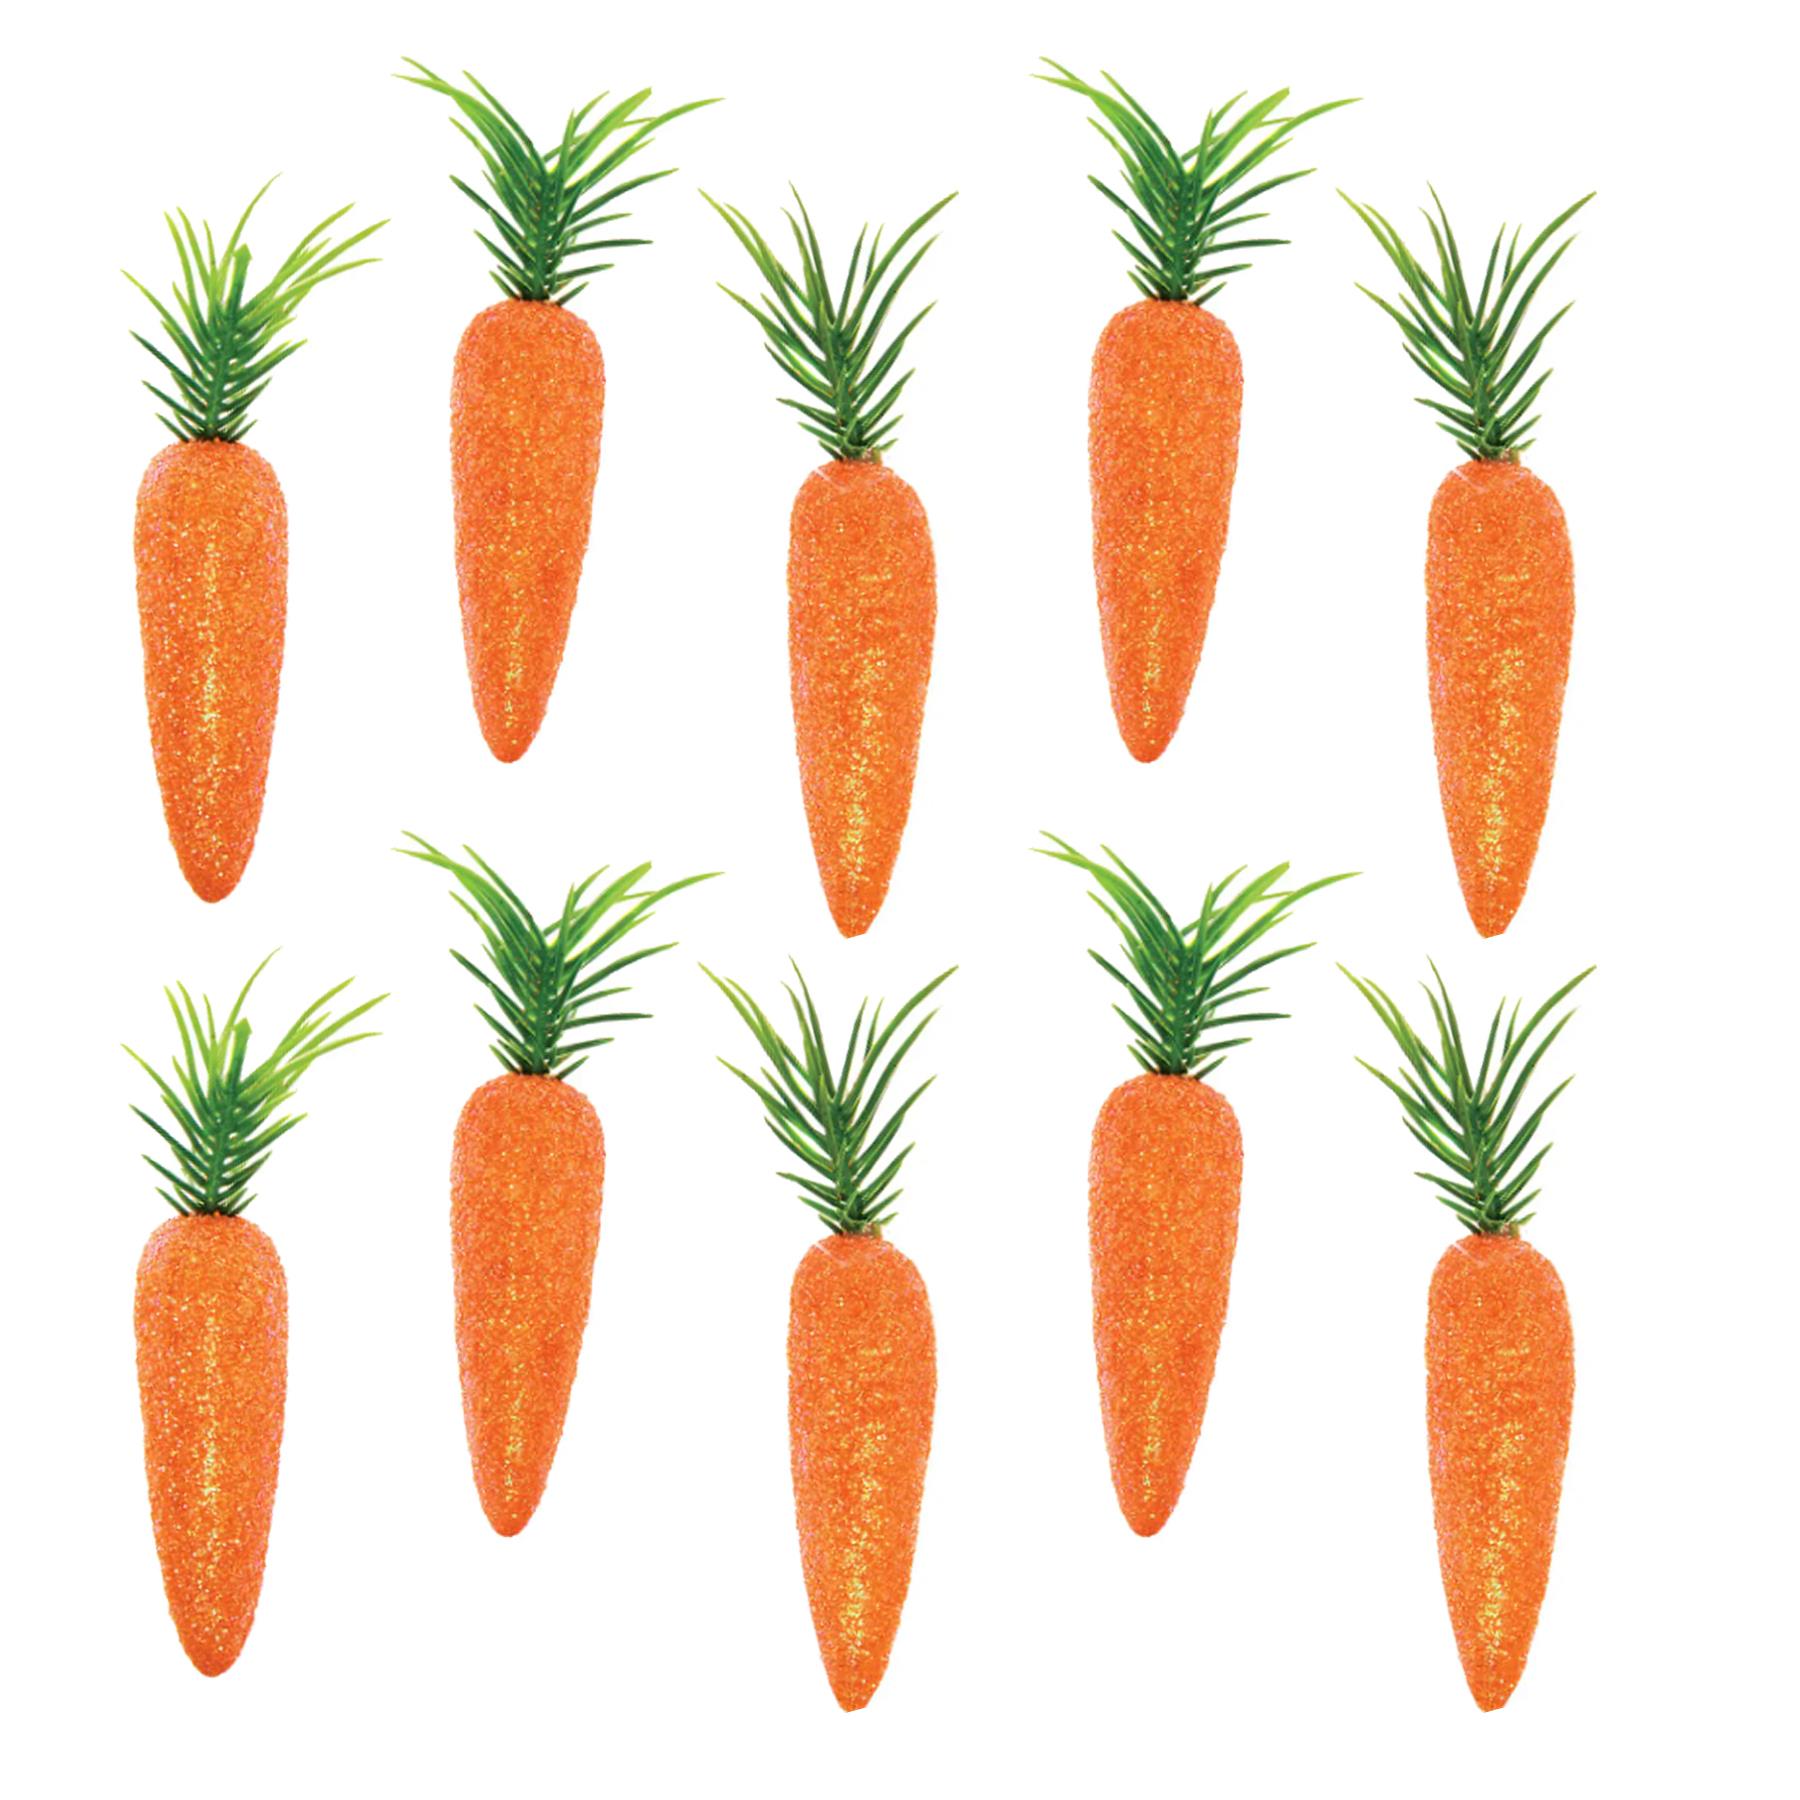 Easter Decorations, Bonnet Making, Arts and Crafts - 10 Pack Glitter Carrots